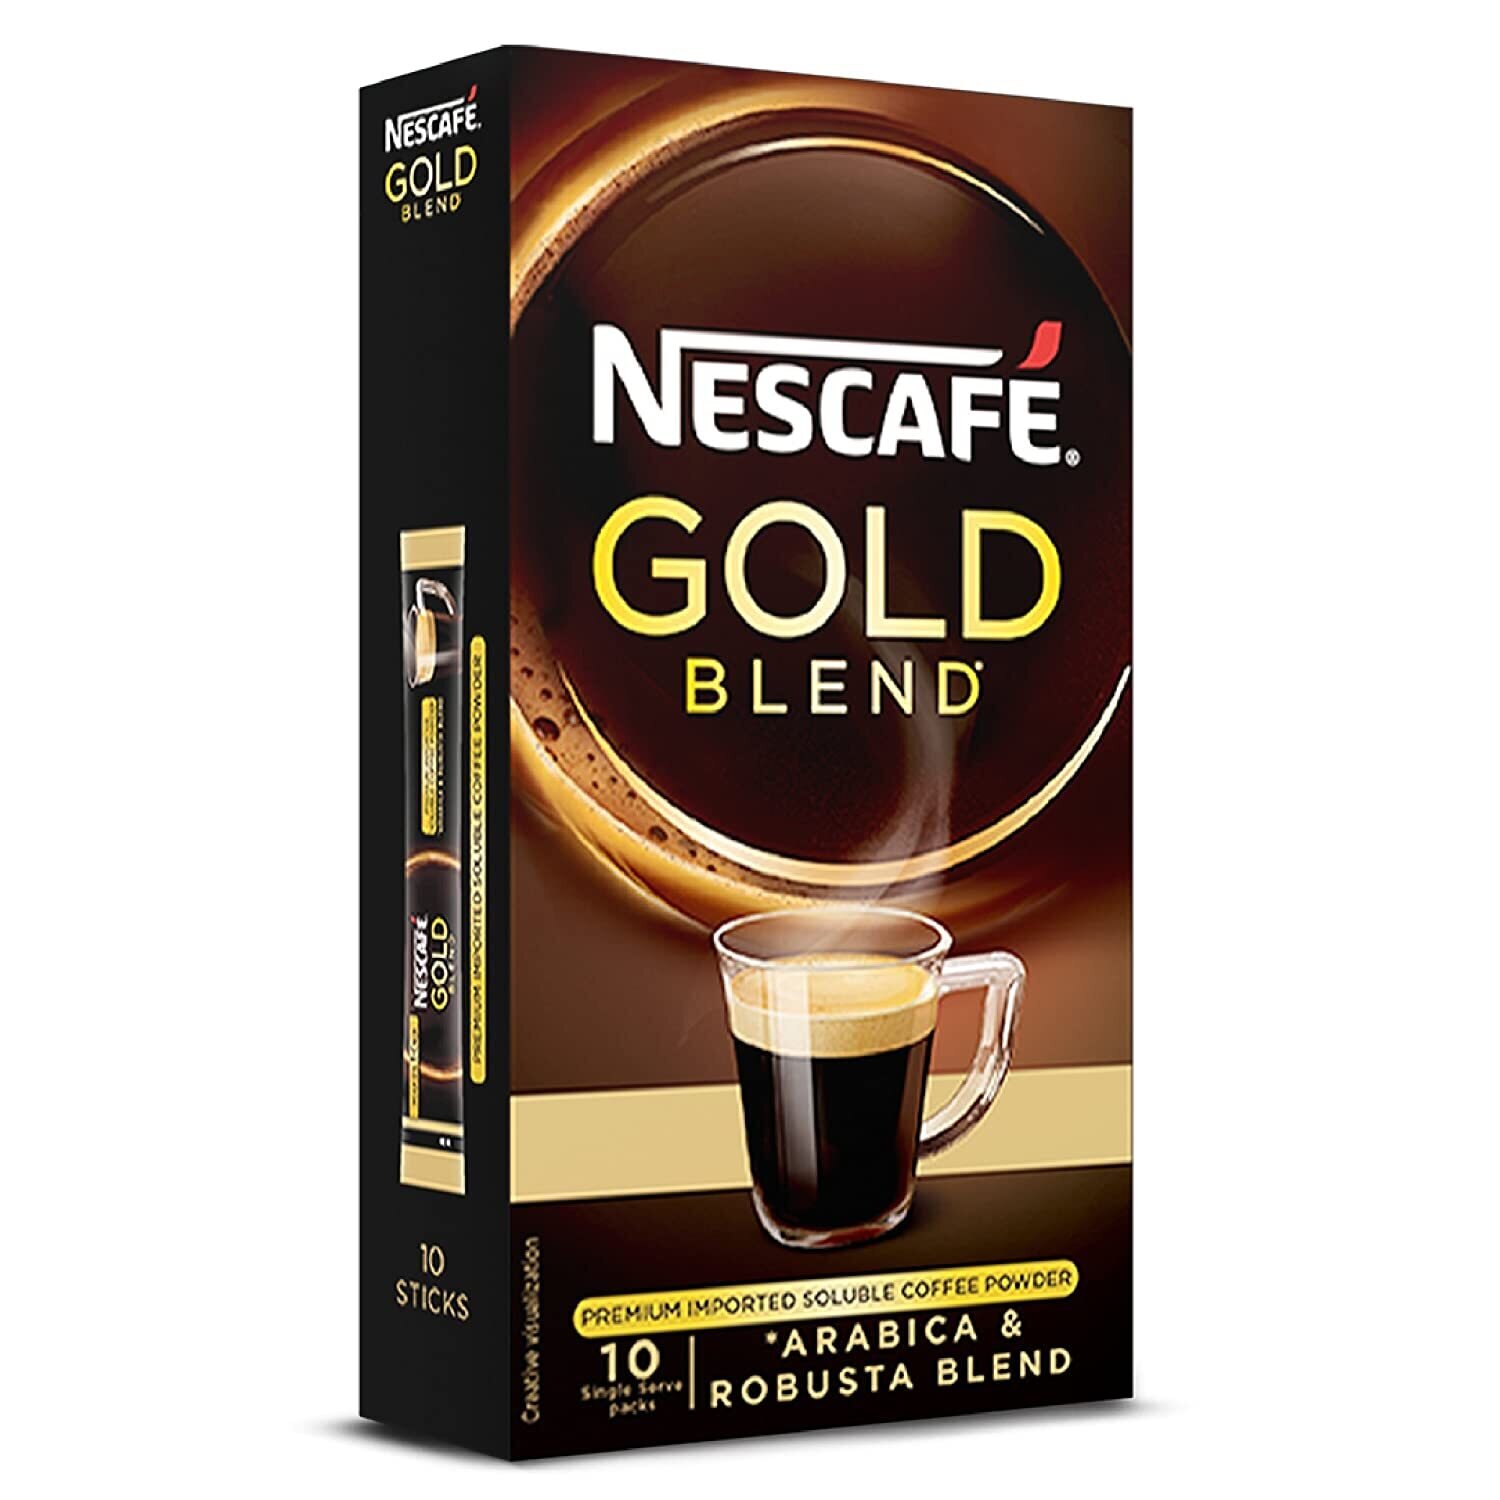 Nescafe Gold Blend Imported